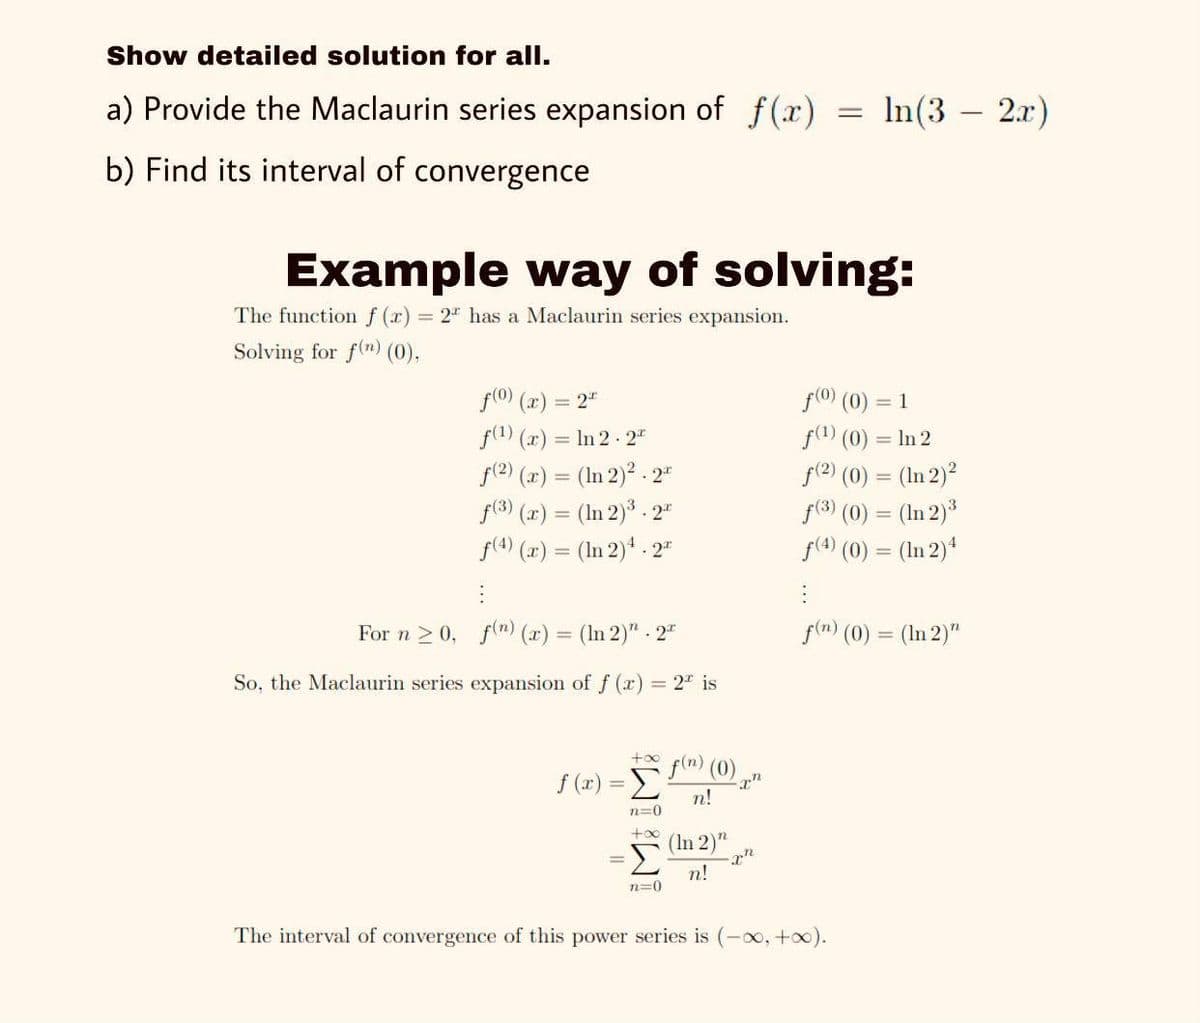 Show detailed solution for all.
a) Provide the Maclaurin series expansion of f (x)
In(3 – 2.x)
b) Find its interval of convergence
Example way of solving:
The functionf (r) 2" has a Maclaurin series expansion.
Solving for f(n) (0),
f(0) (x) = 2"
f(1) (r) = In 2 2"
f(2) (r) = (In 2)2 - 2"
f(3) (2) = (In 2)3 . 2"
f(4) (x) = (In 2)* - 2"
f(0 (0) = 1
f(1) (0) = In 2
f(2) (0) = (In 2)2
f(3) (0) = (In 2)3
f(4) (0) = (In 2)4
For n 2 0, f(m) (x) = (In 2)" 2"
f(n) (0) = (In 2)"
%3D
So, the Maclaurin series expansion of f (x) = 2" is
+oo
f(m) (0)
f (x) = E
n!
%3D
n=0
+0o
(In 2)"
n!
n=0
The interval of convergence of this power series is
00, +0).
